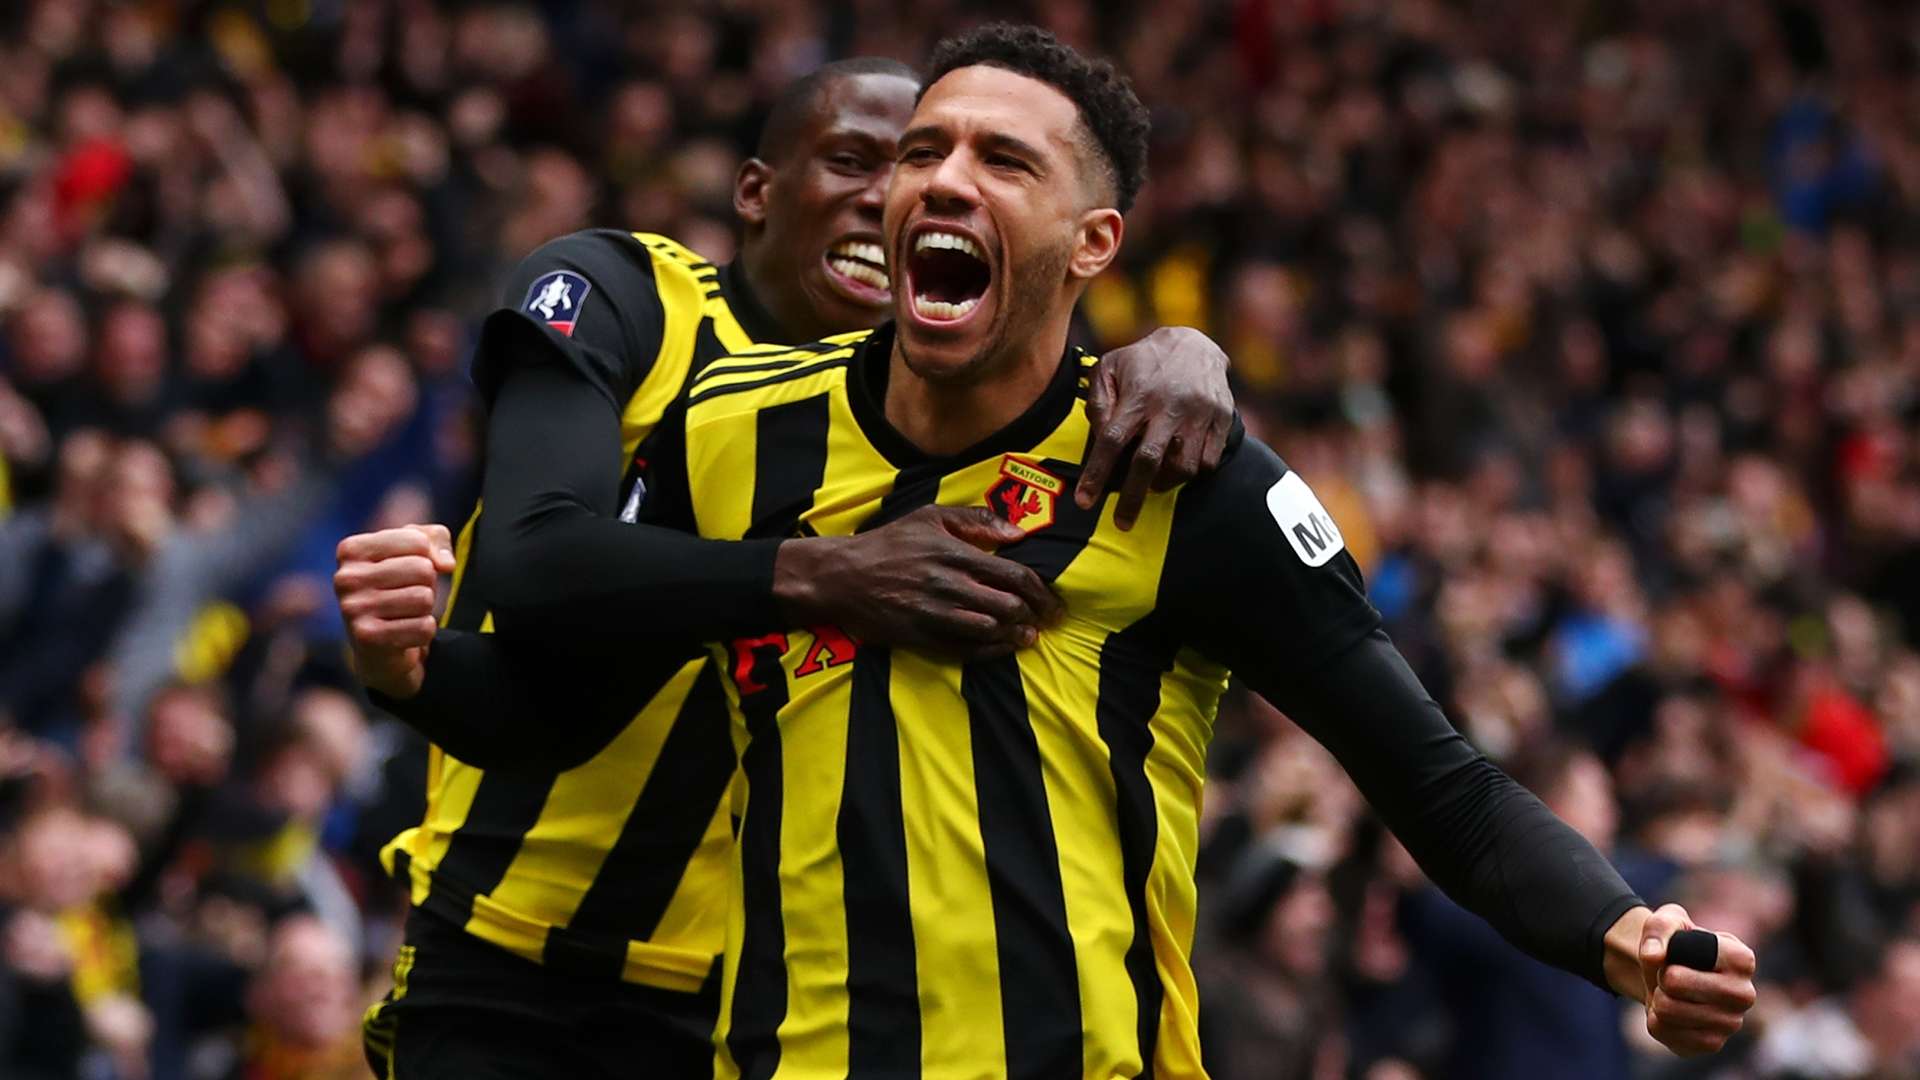 Etienne Capoue Watford FA Cup